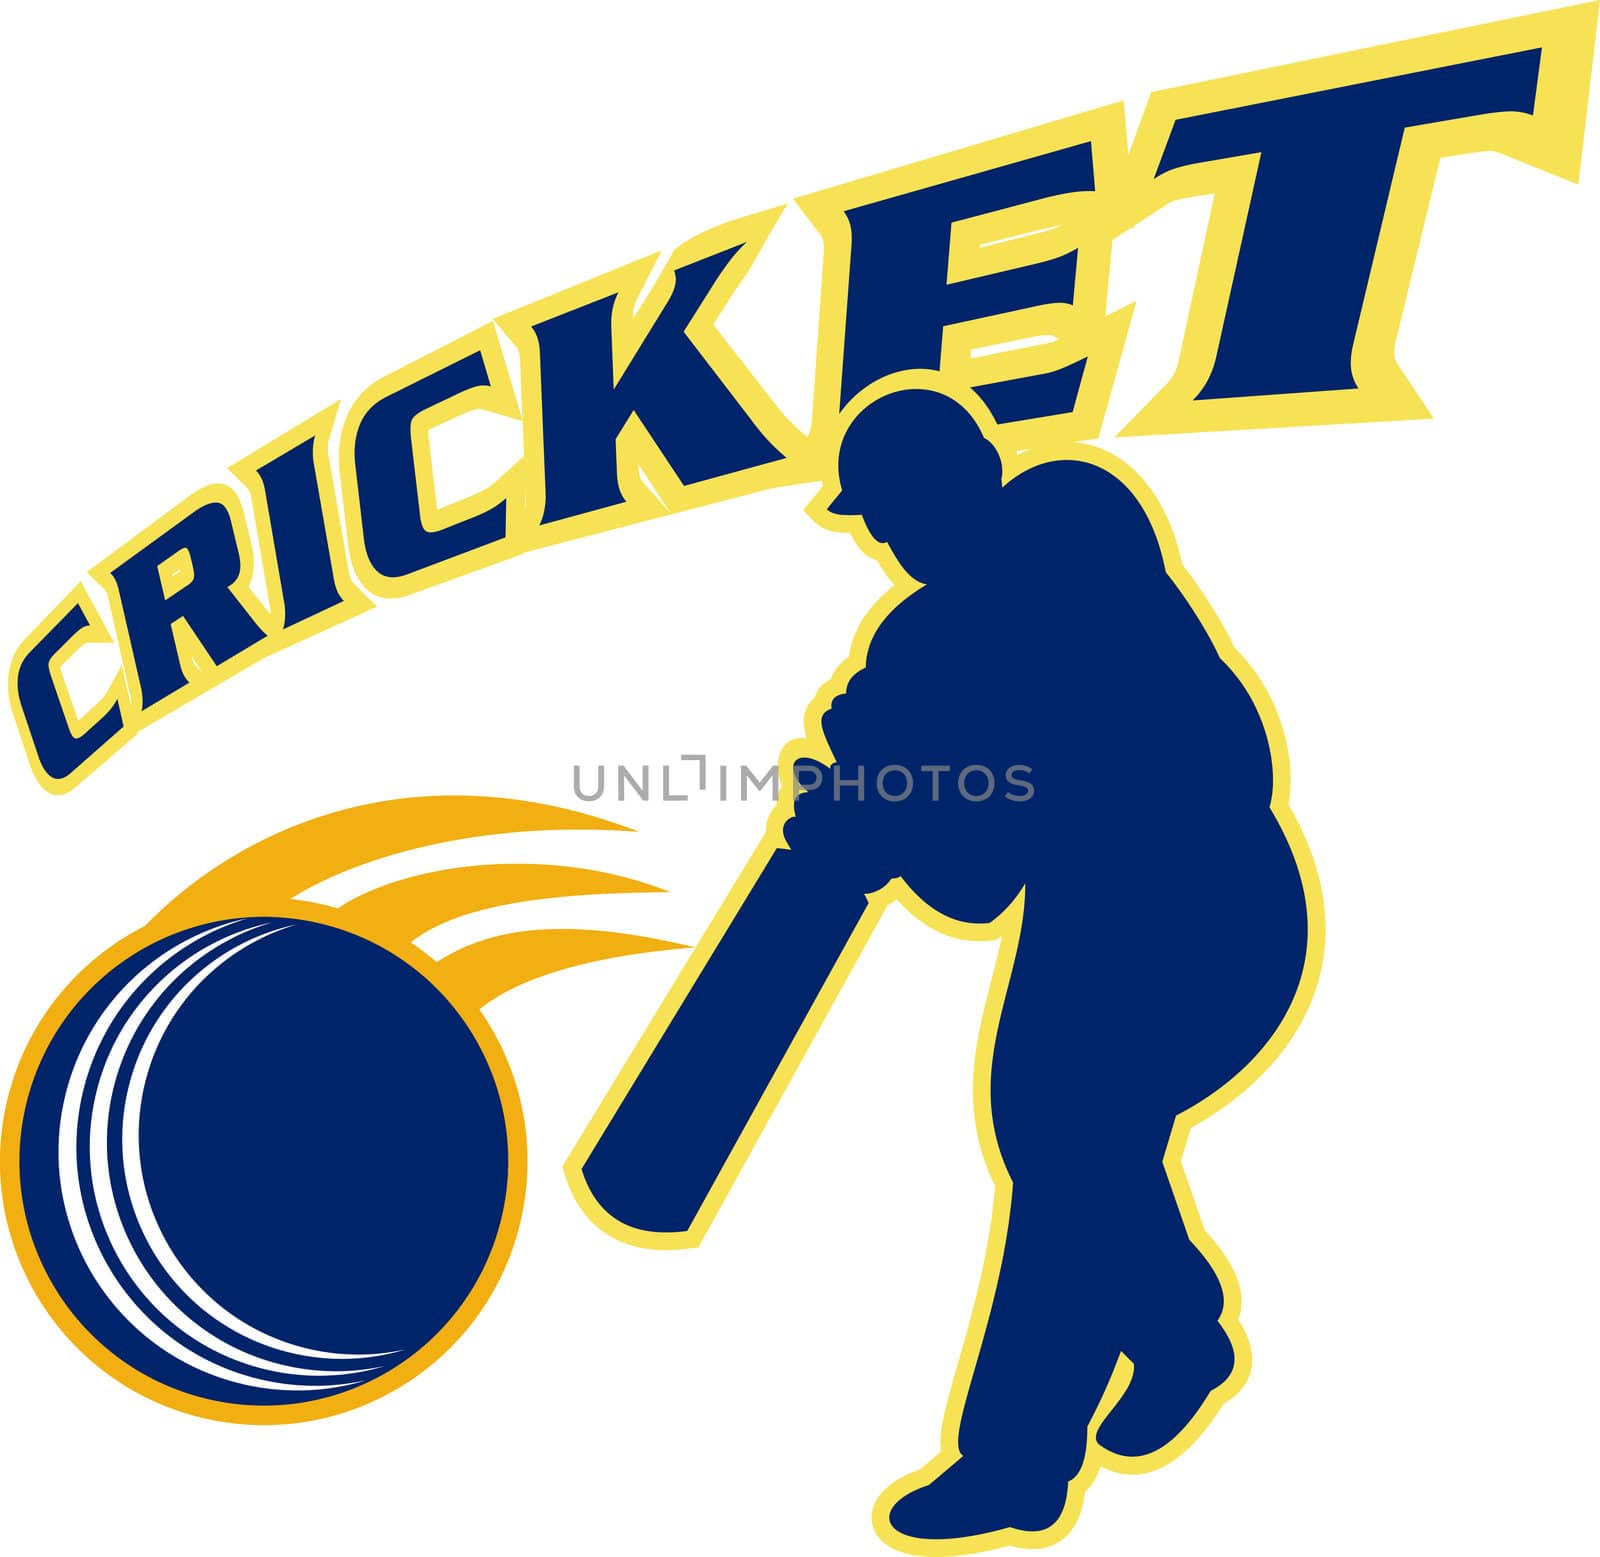 illustration of a cricket batsman silhouette batting front view isolated on white